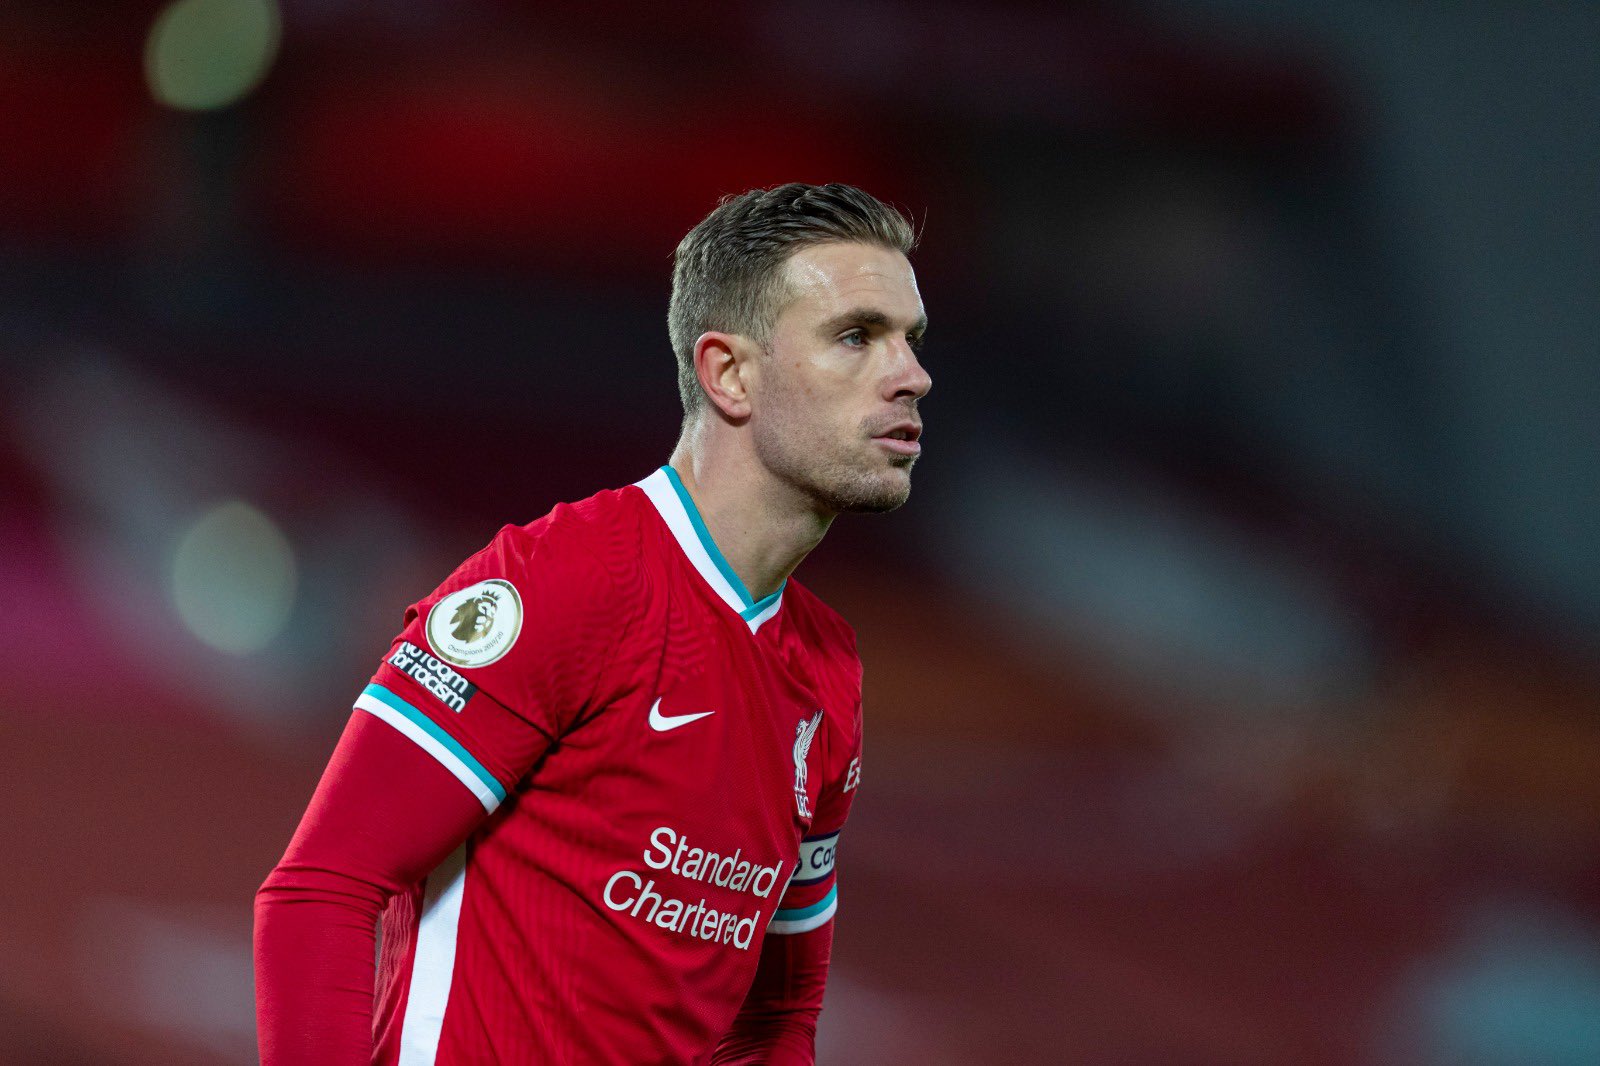 Liverpool captain Jordan Henderson reacts to tributes with touching tweet